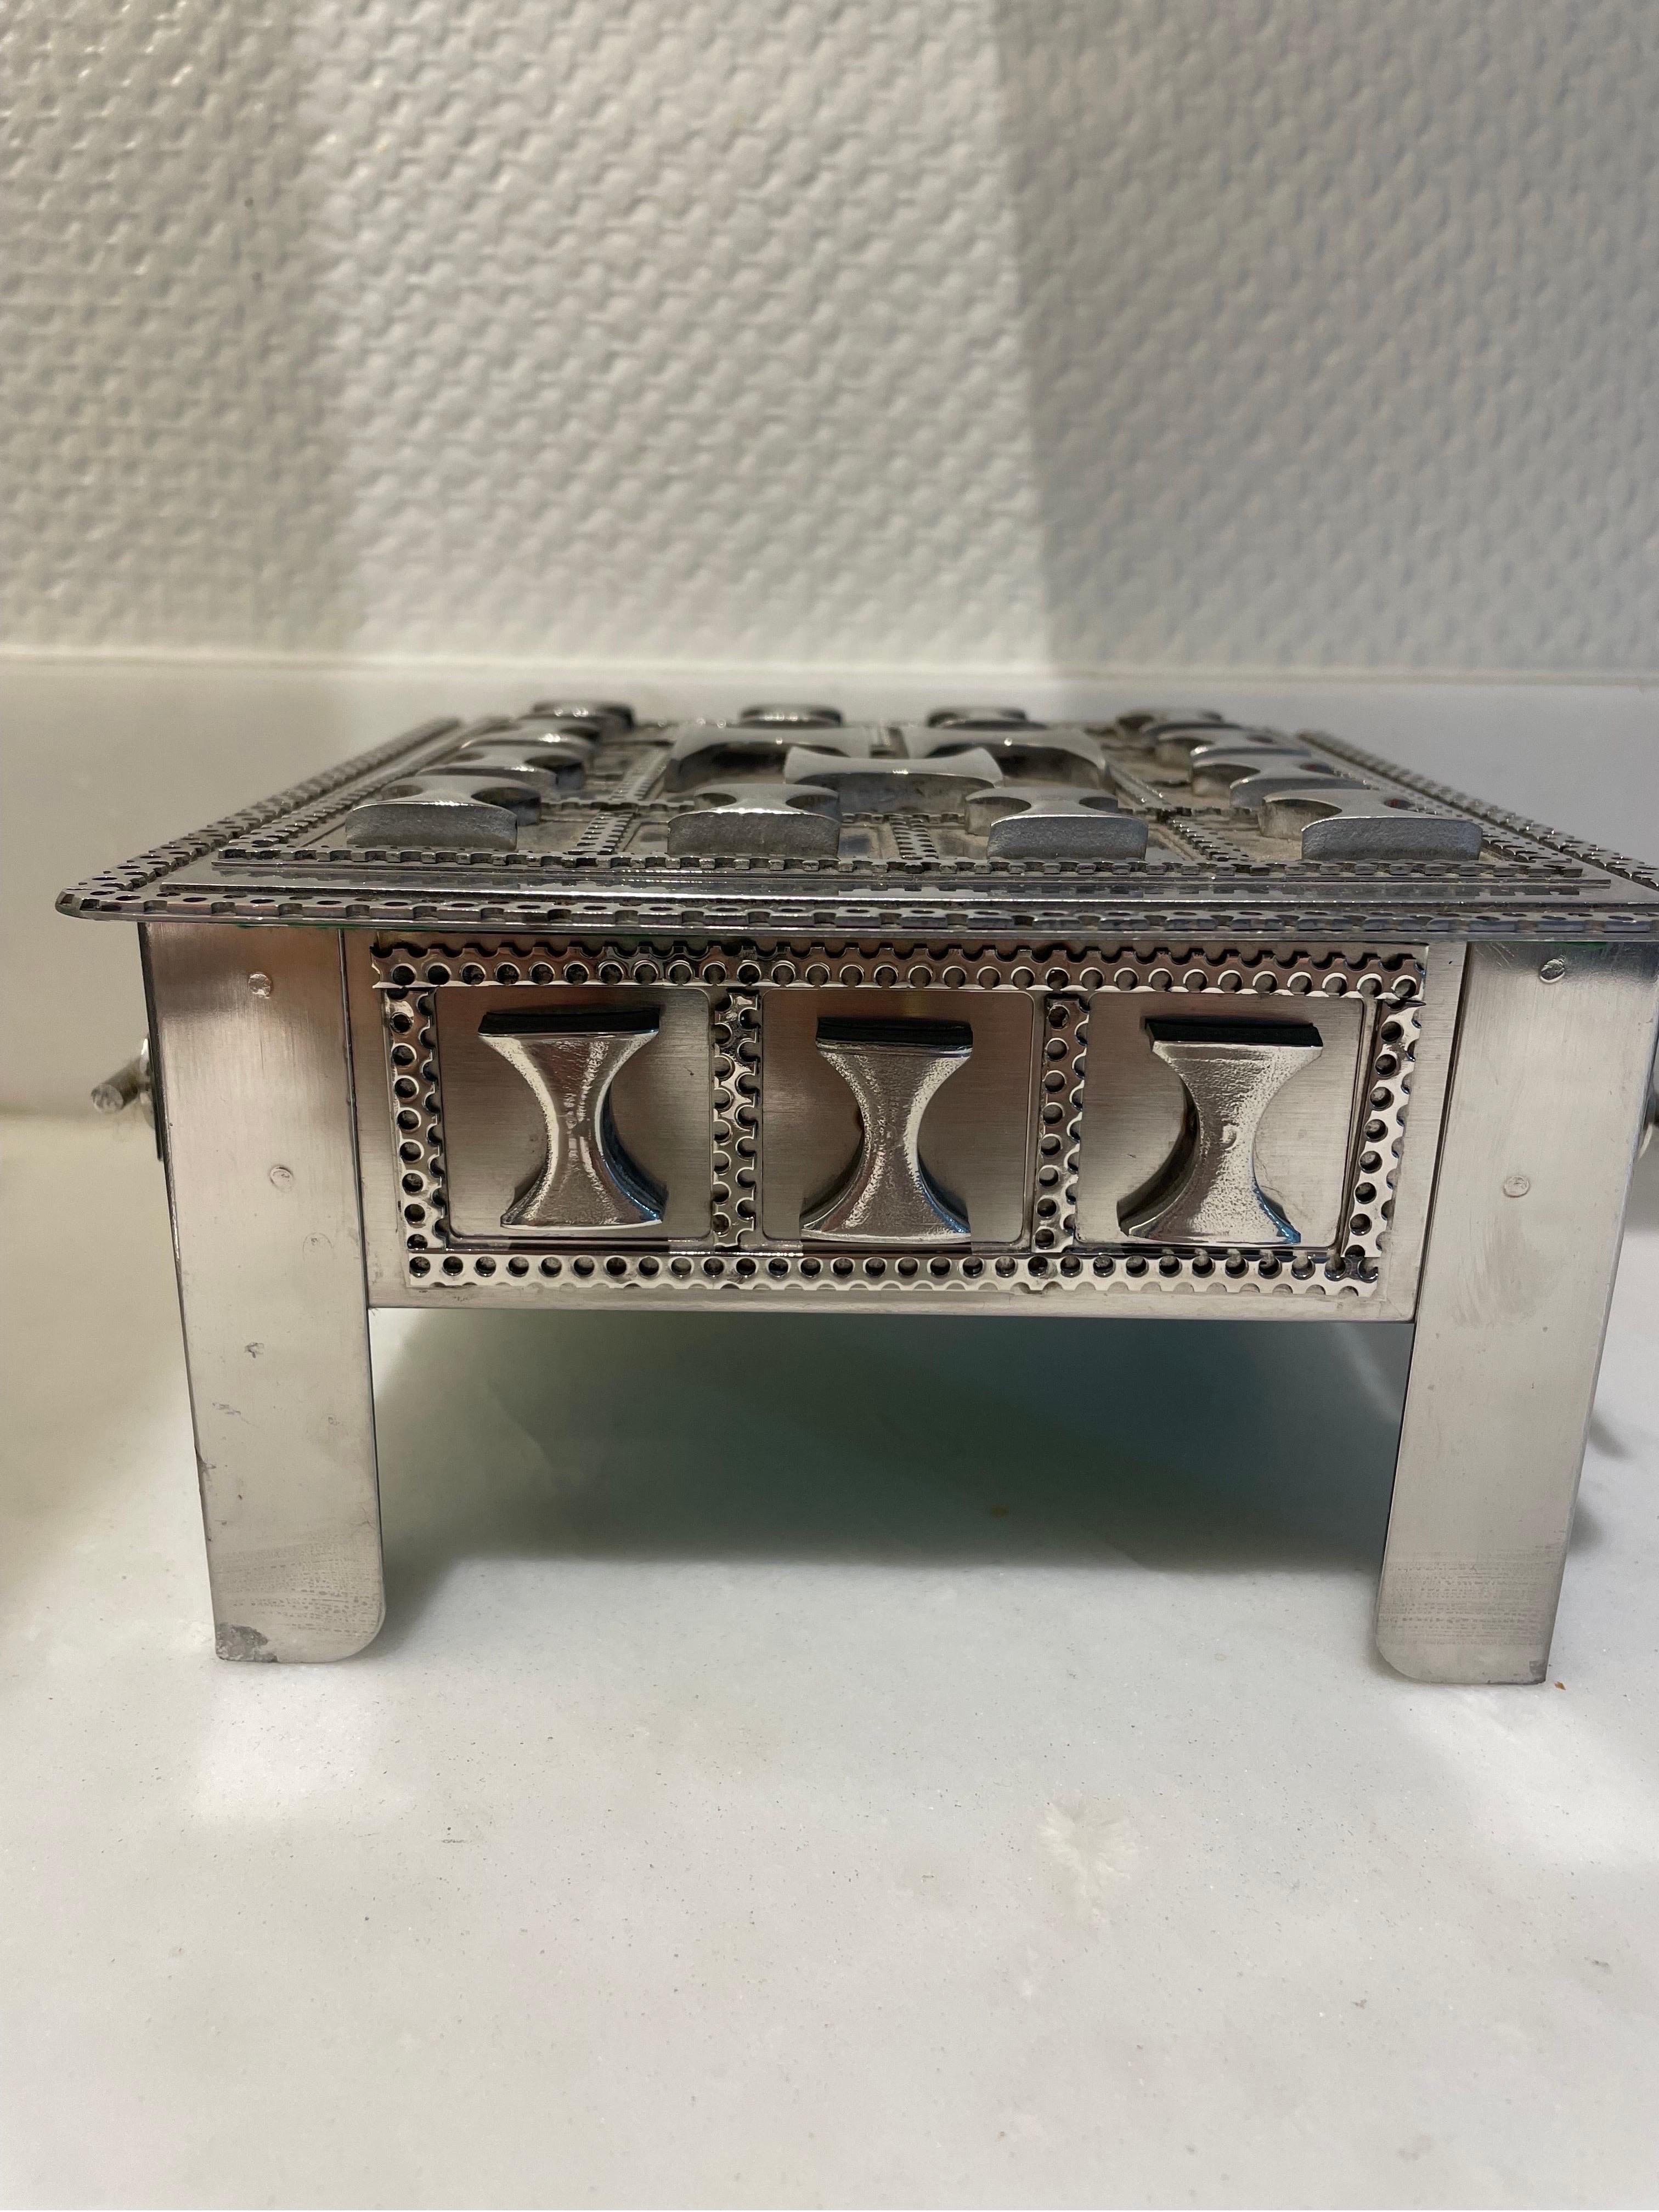 This is a cool geometric adorned stainless steel scrap metal box made by a polish immigrant folk artist Stanley Szwarc in 1999 